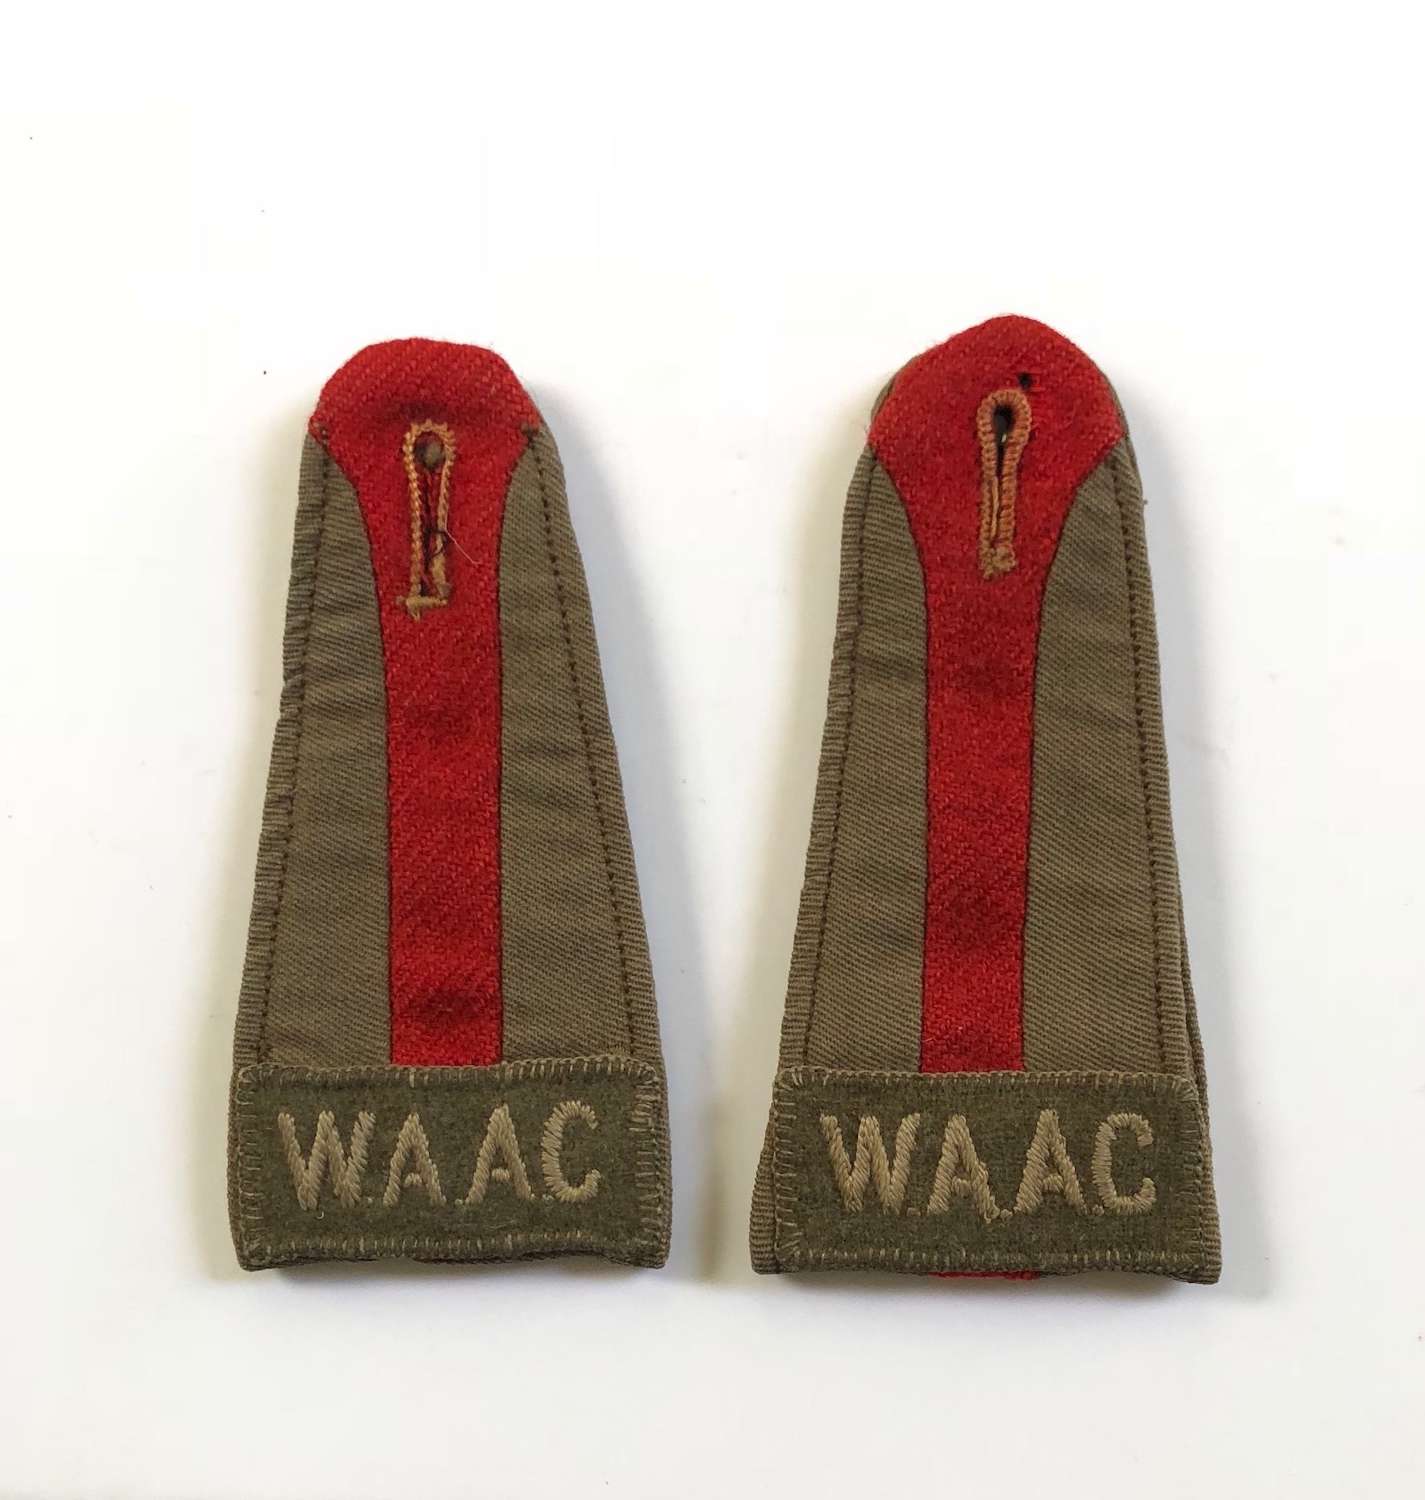 WW1 WAAC Women’s Army Auxiliary Corps Shoulder Straps.